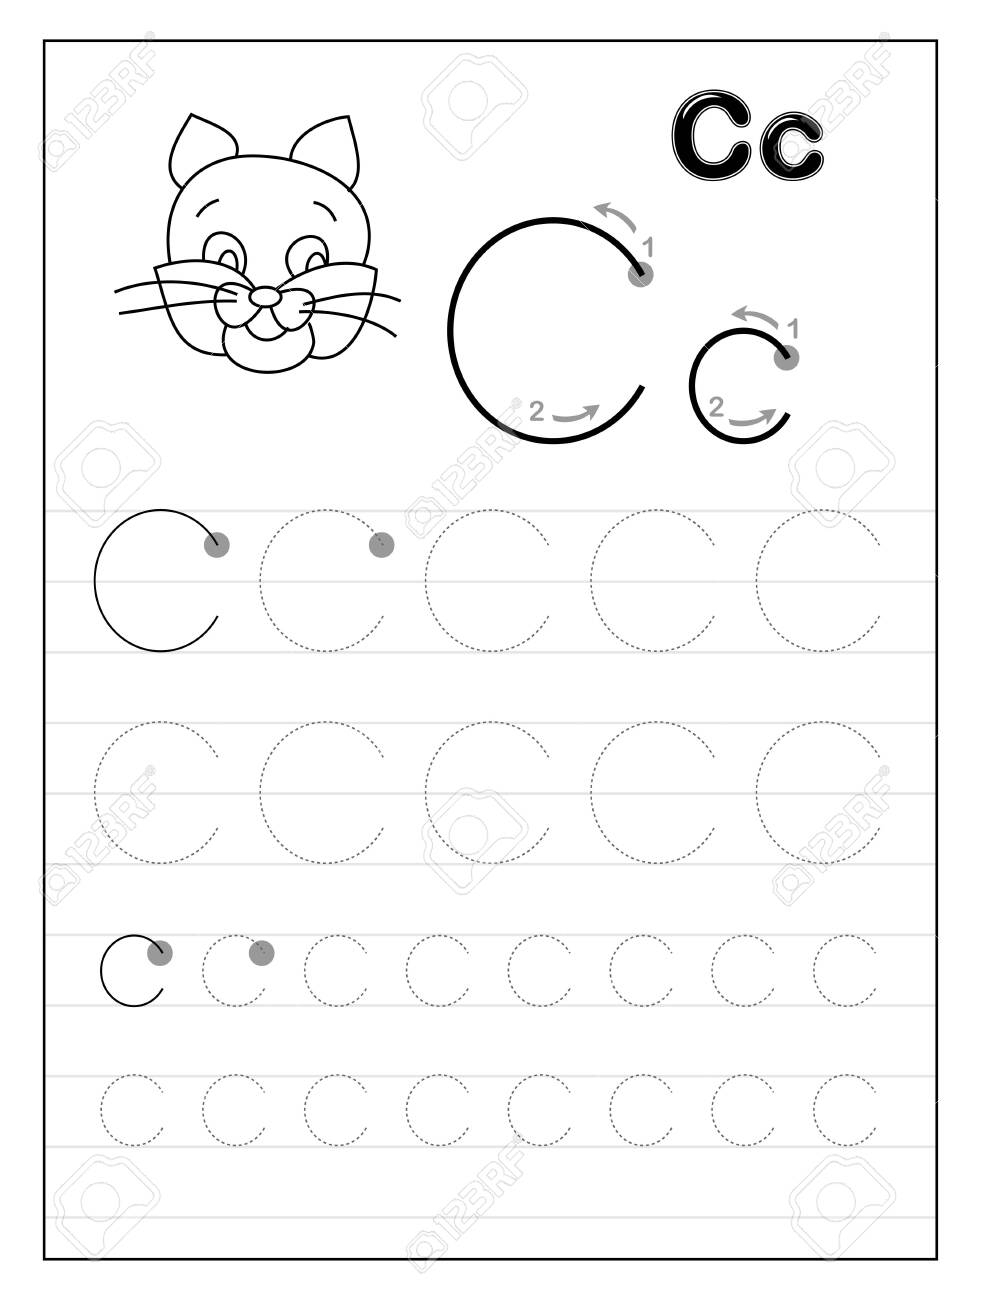 Tracing Alphabet Letter C. Black And White Educational Pages.. inside Letter C Tracing Page